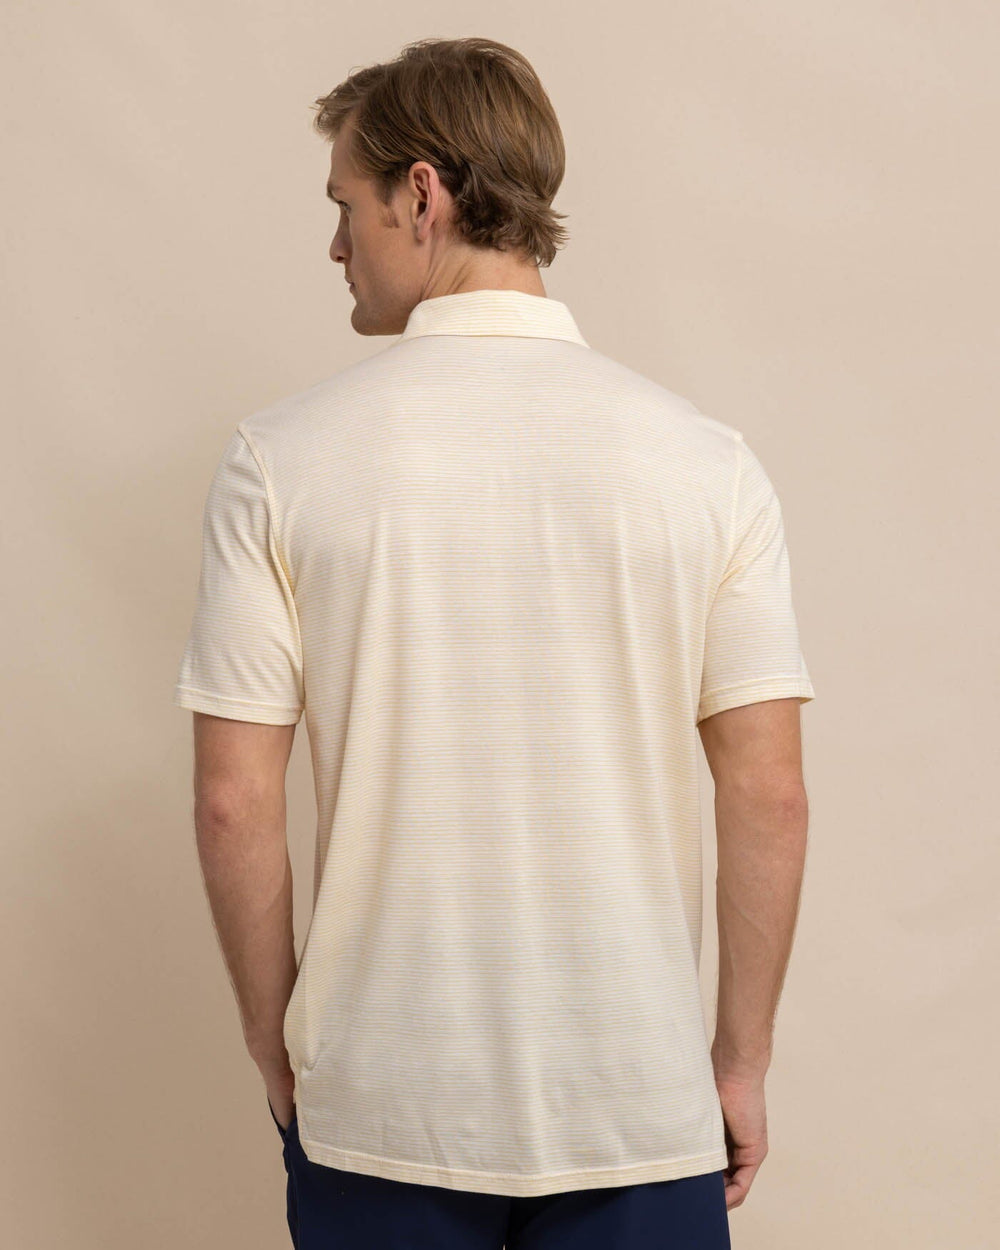 The back view of the Southern Tide The Seaport Davenport Stripe Polo by Southern Tide - Beach Ball Yellow